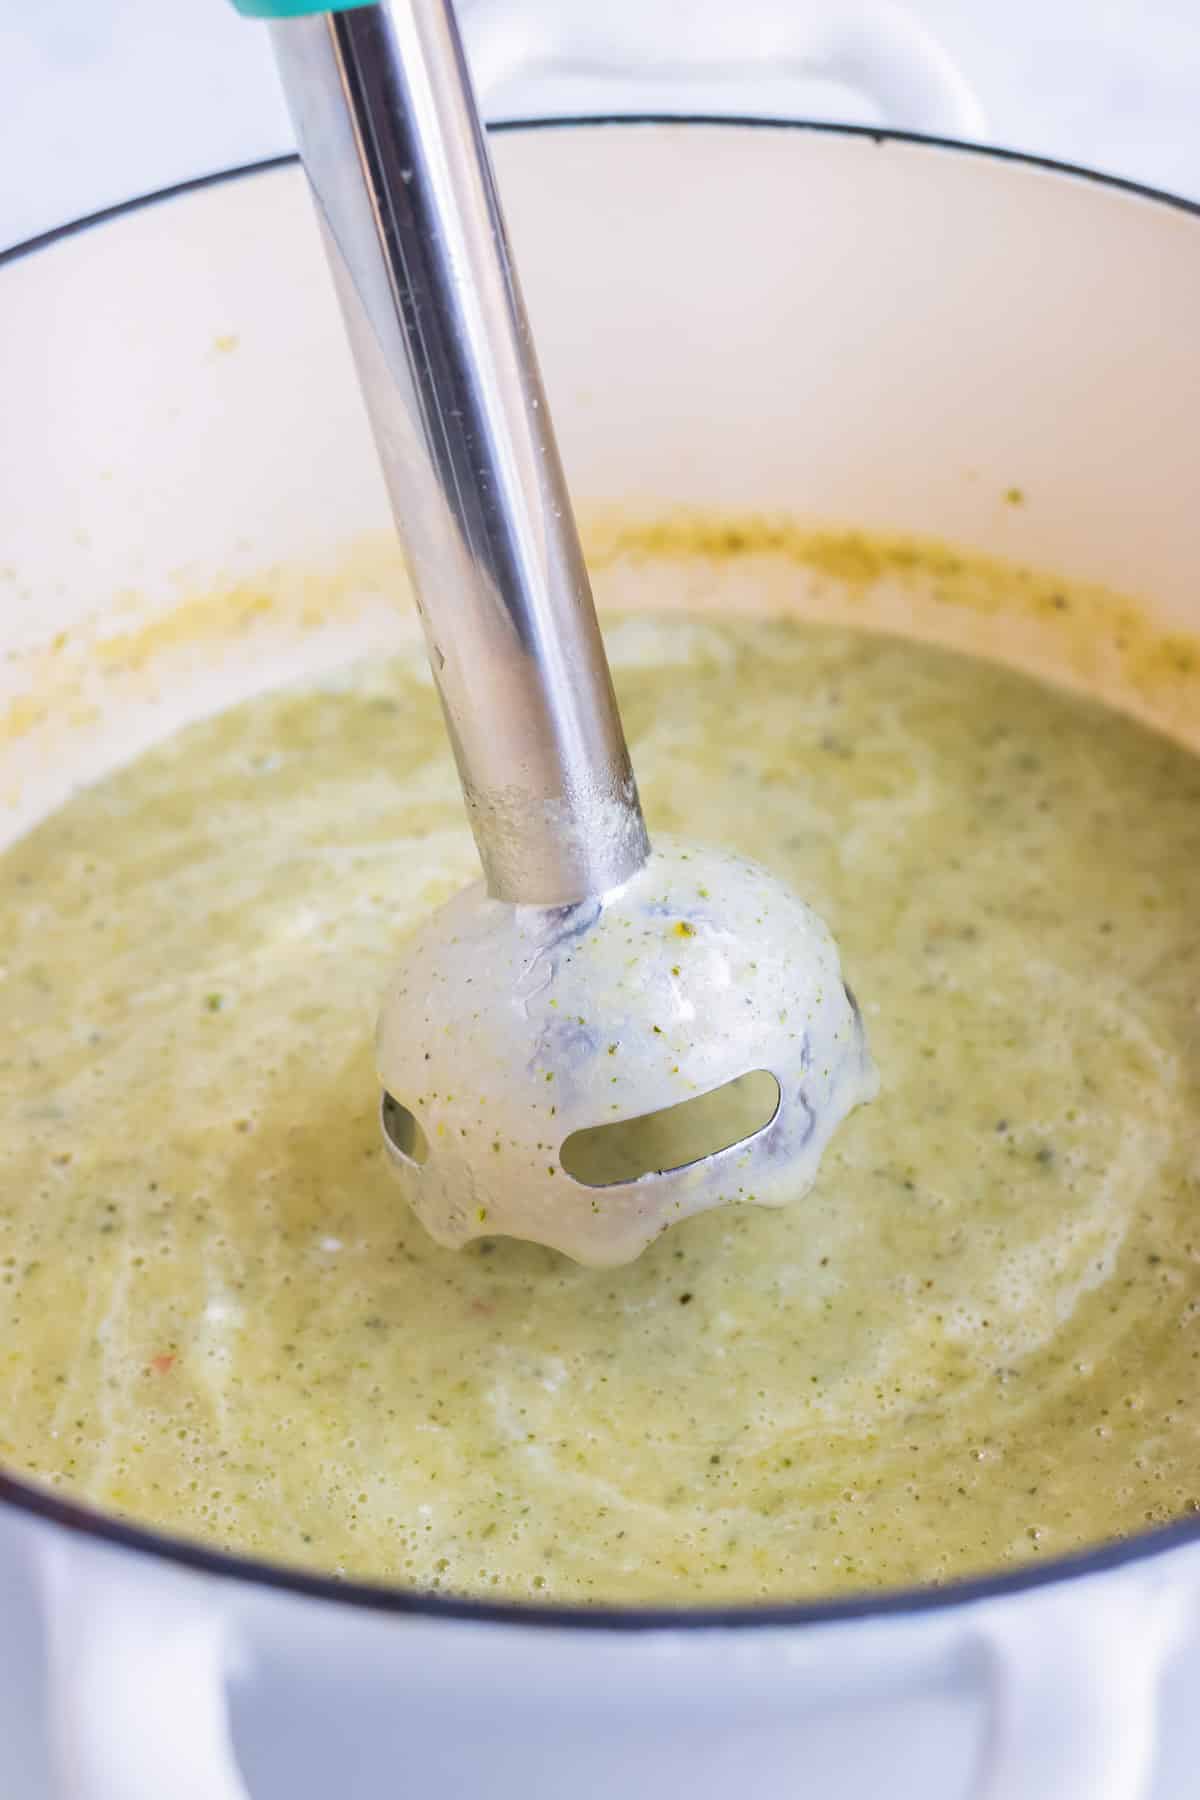 An immersion blender is used to create a smooth soup.